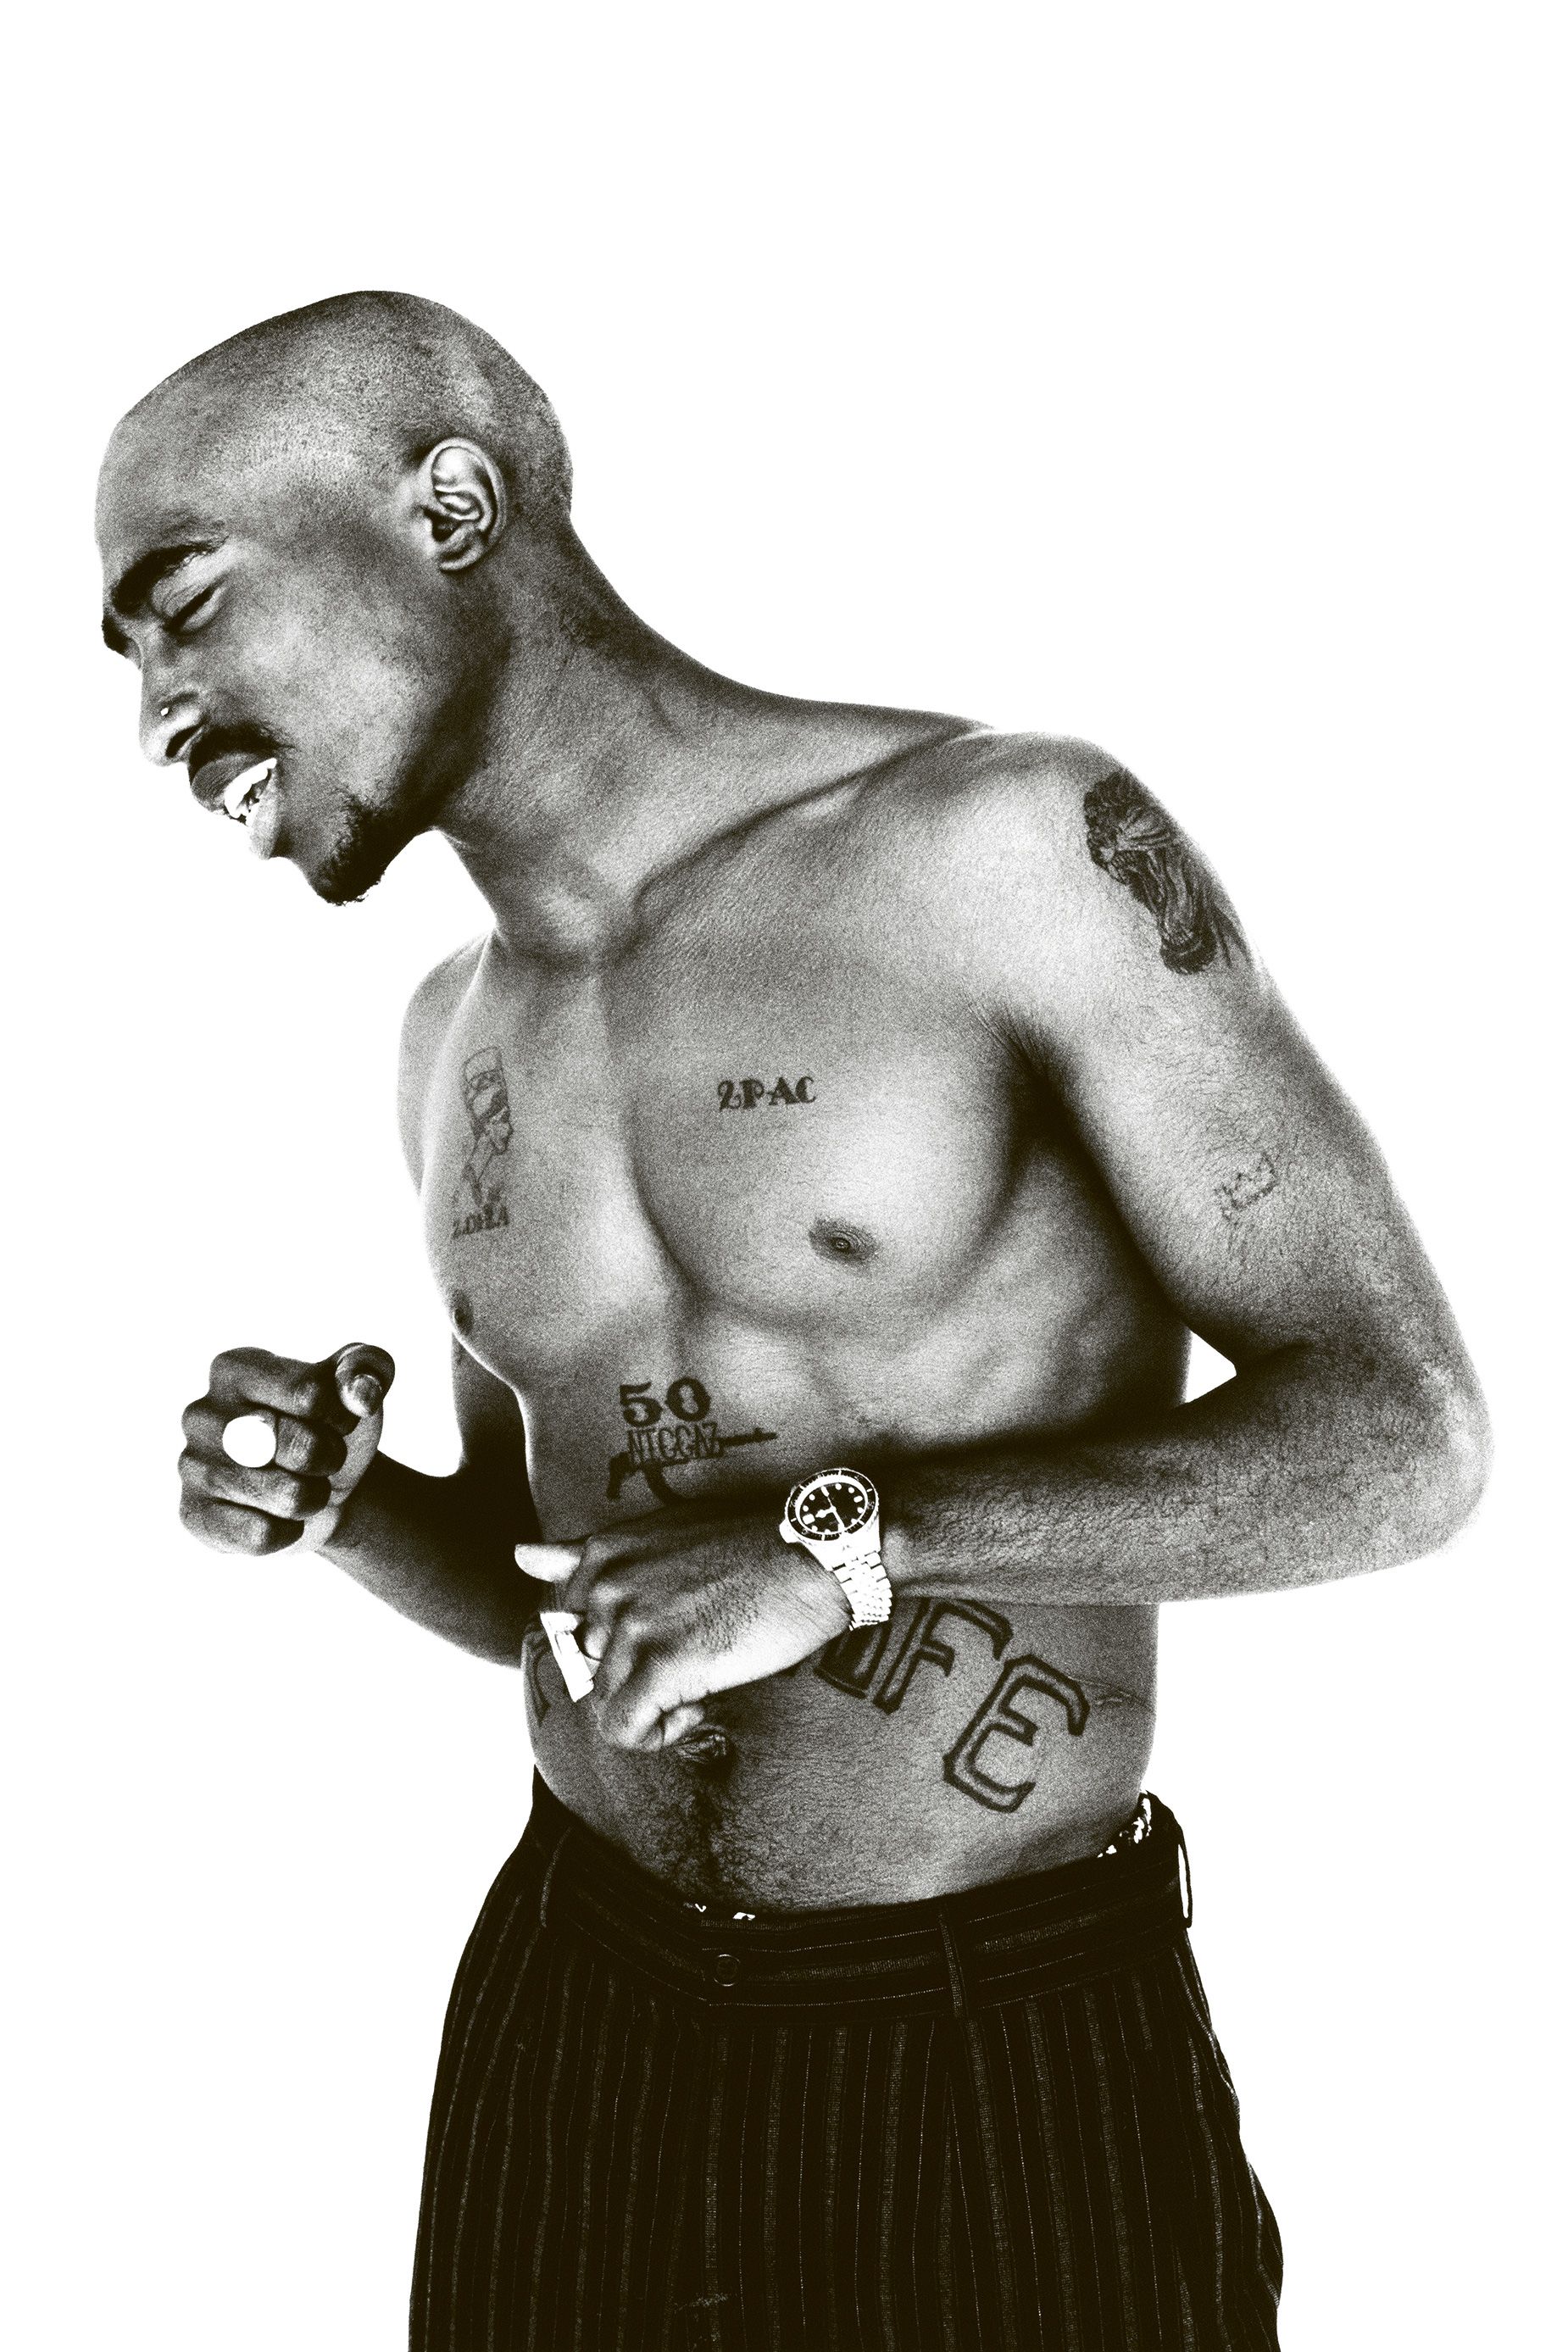 New book lifts the lid on photographing Tupac 'the legend' | CNN